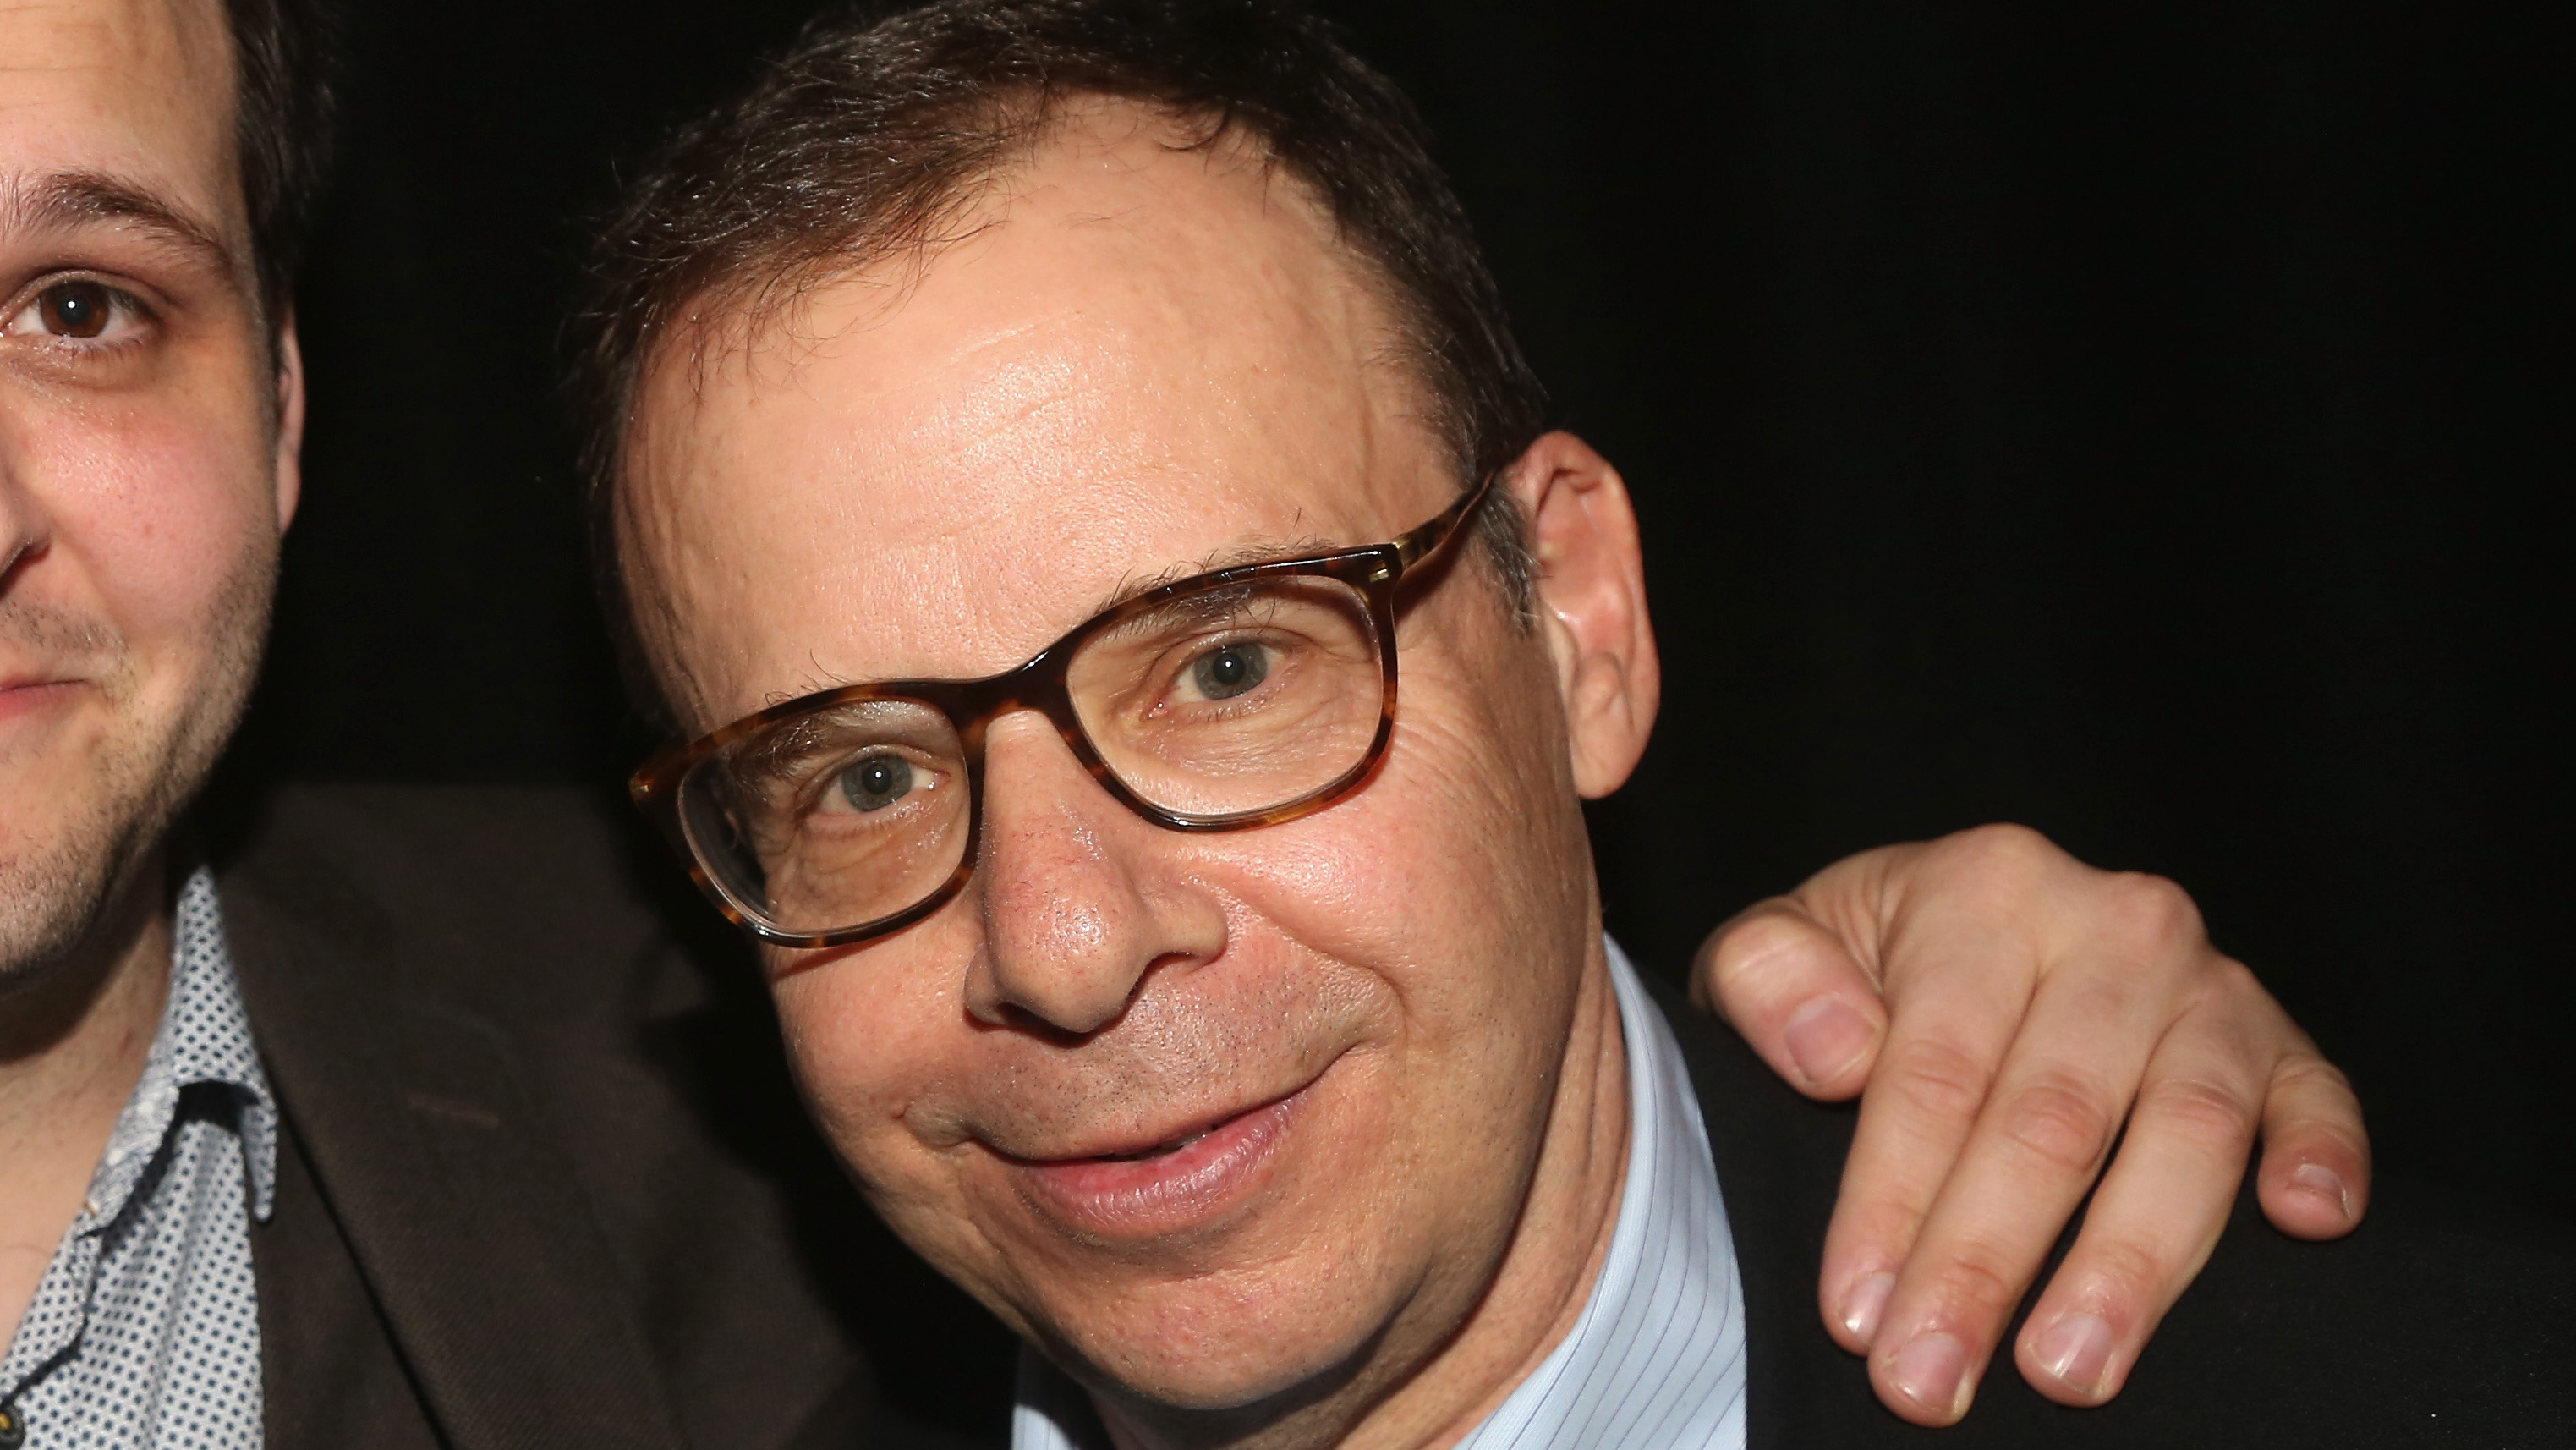 Rick Moranis Is Returning to TV to Reprise Spaceballs Role